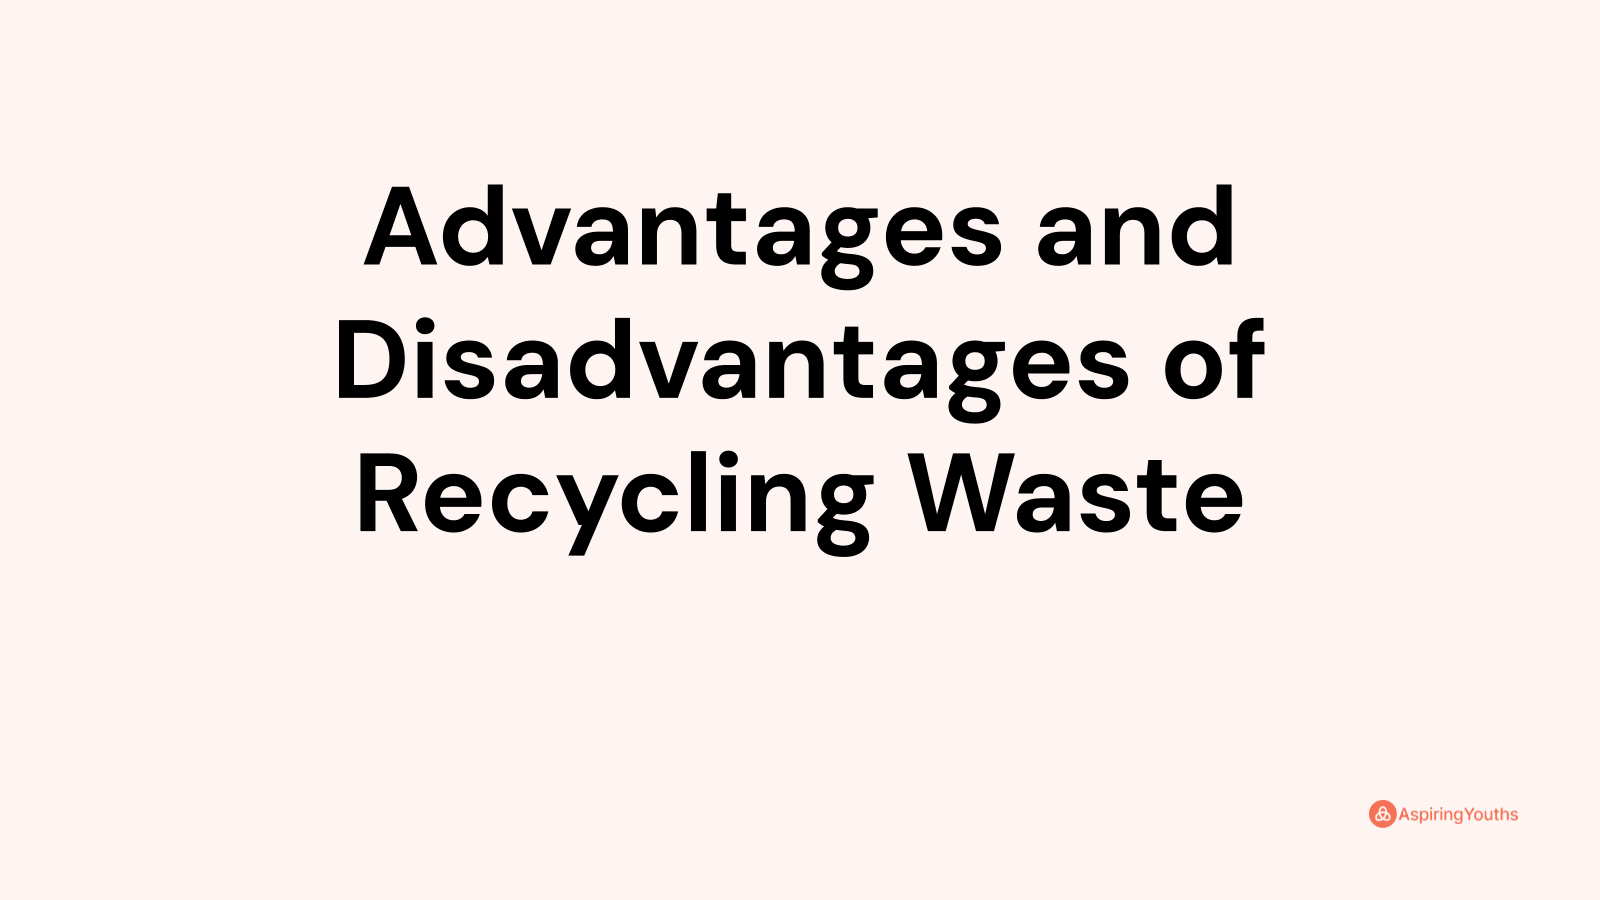 Advantages and disadvantages of Recycling Waste